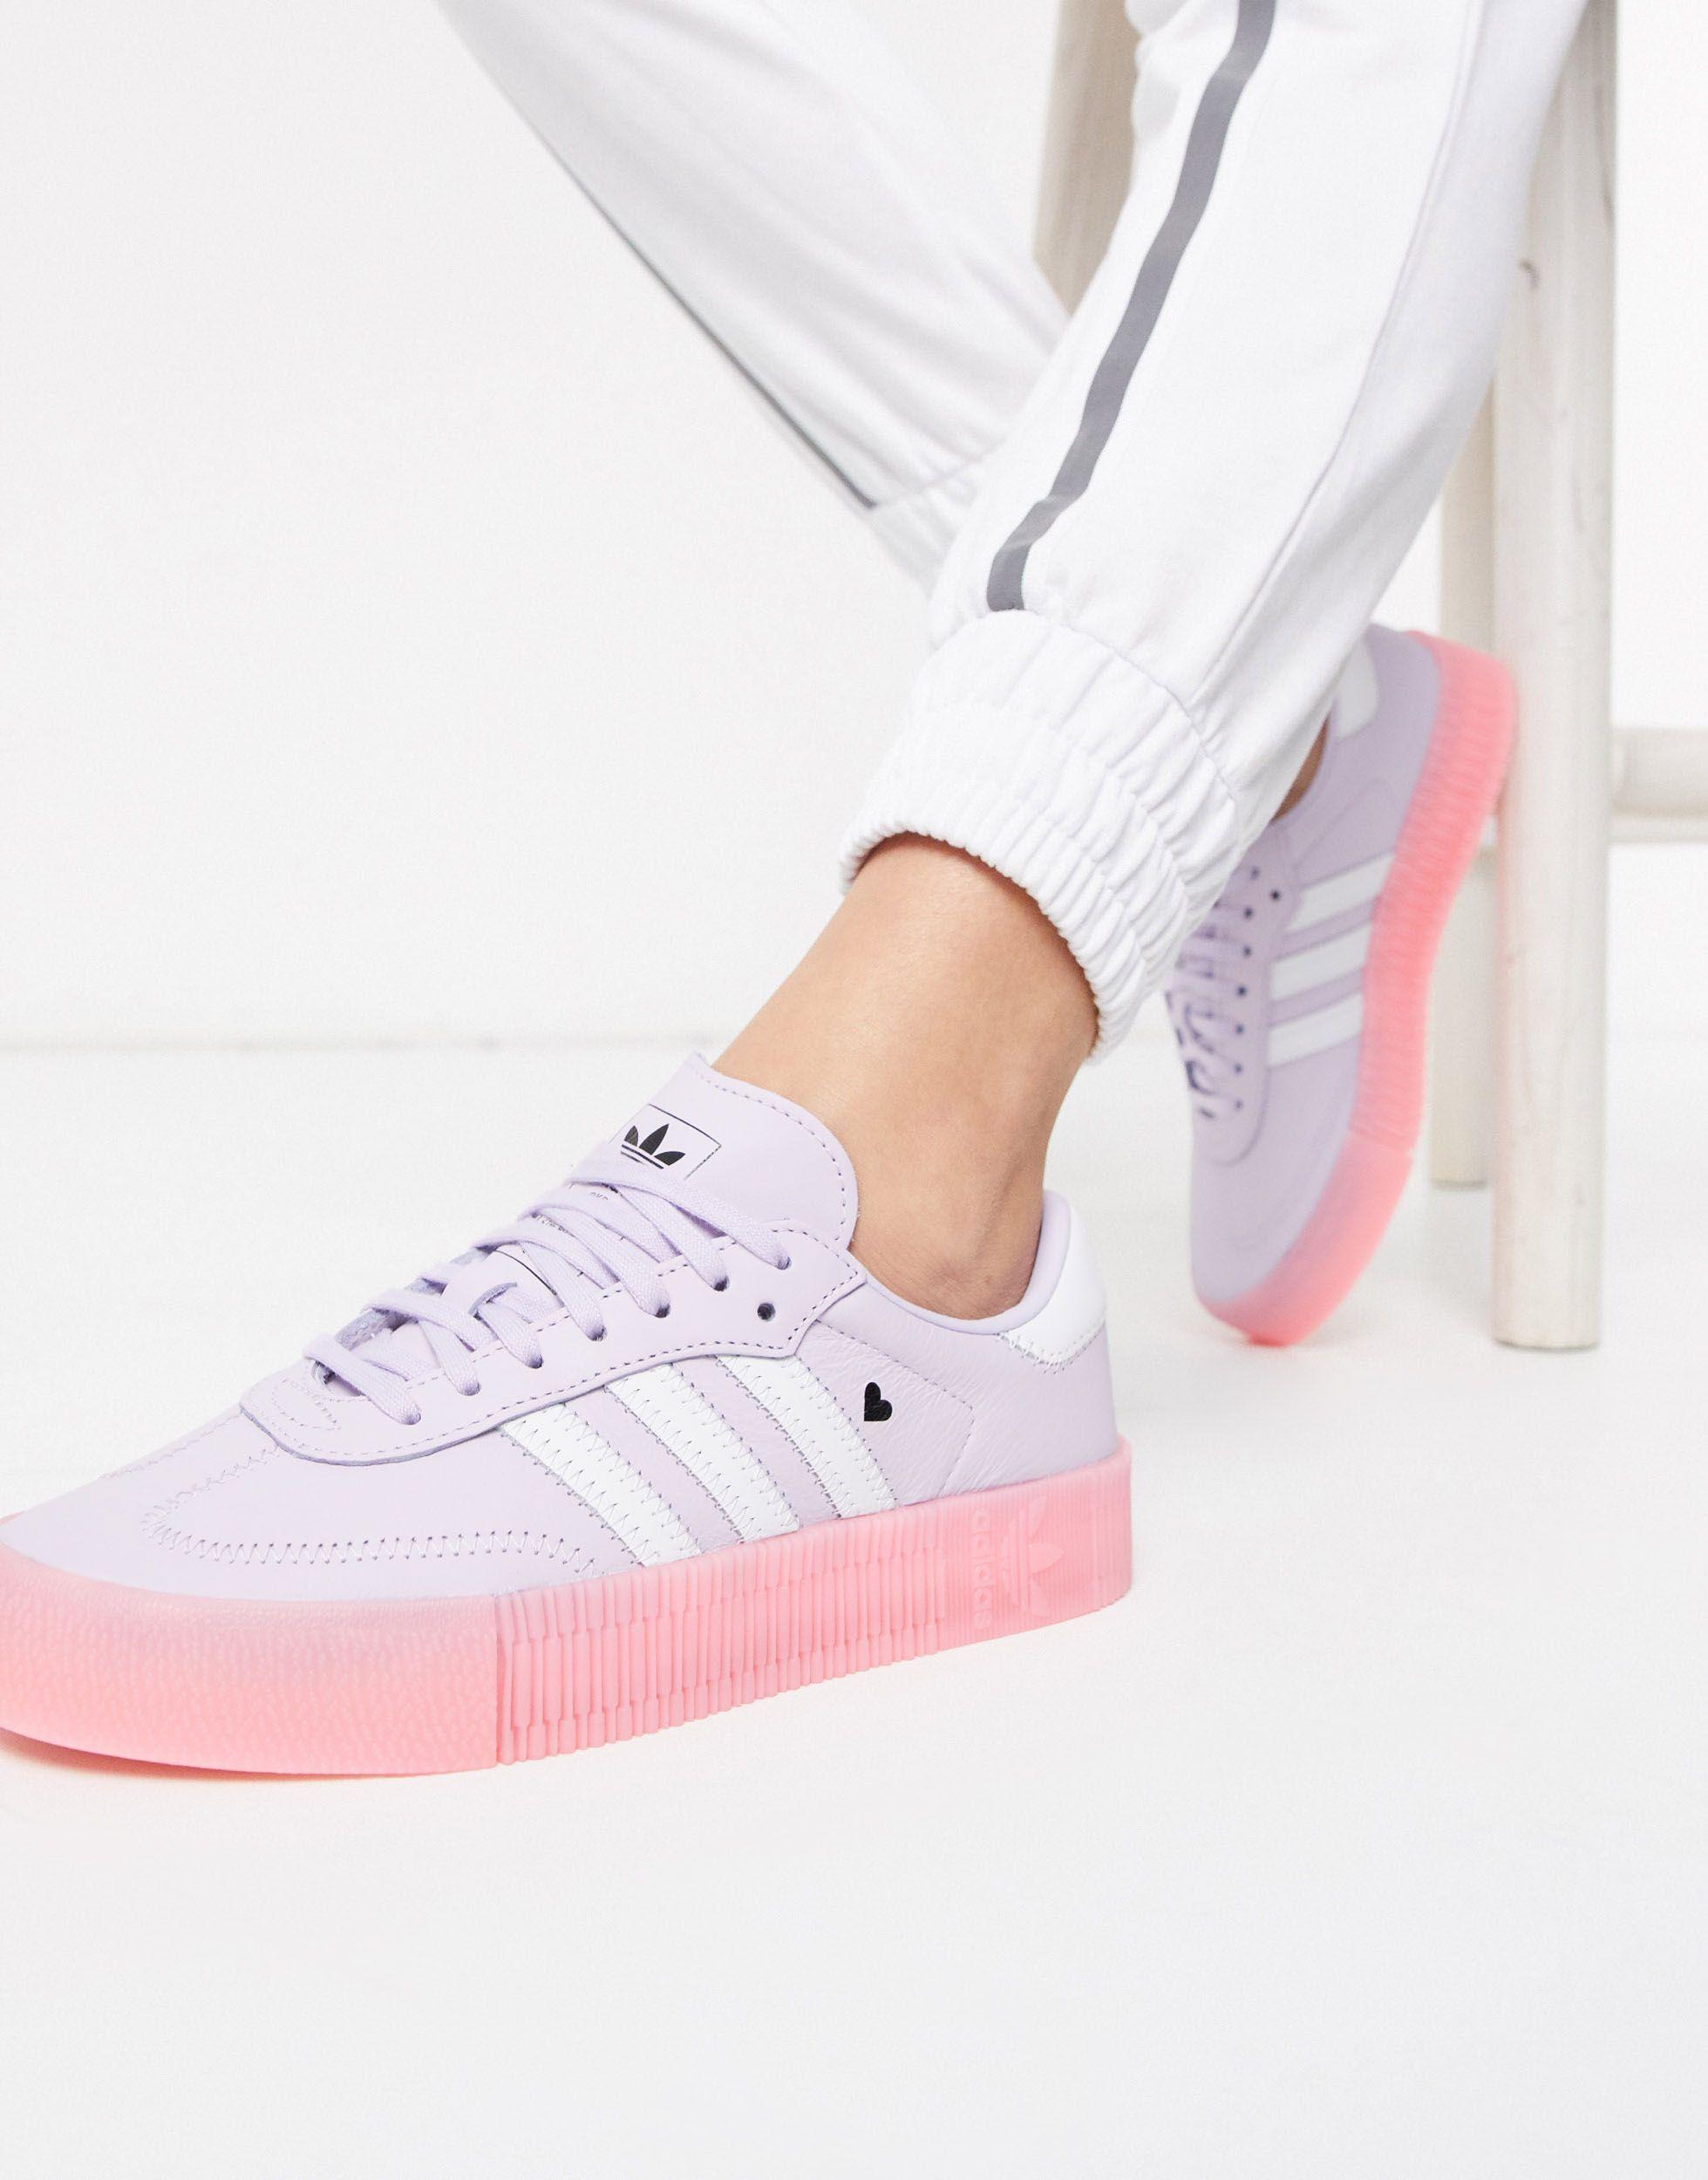 adidas Originals Rubber Samba Rose Sneakers With Heart Detail in ...